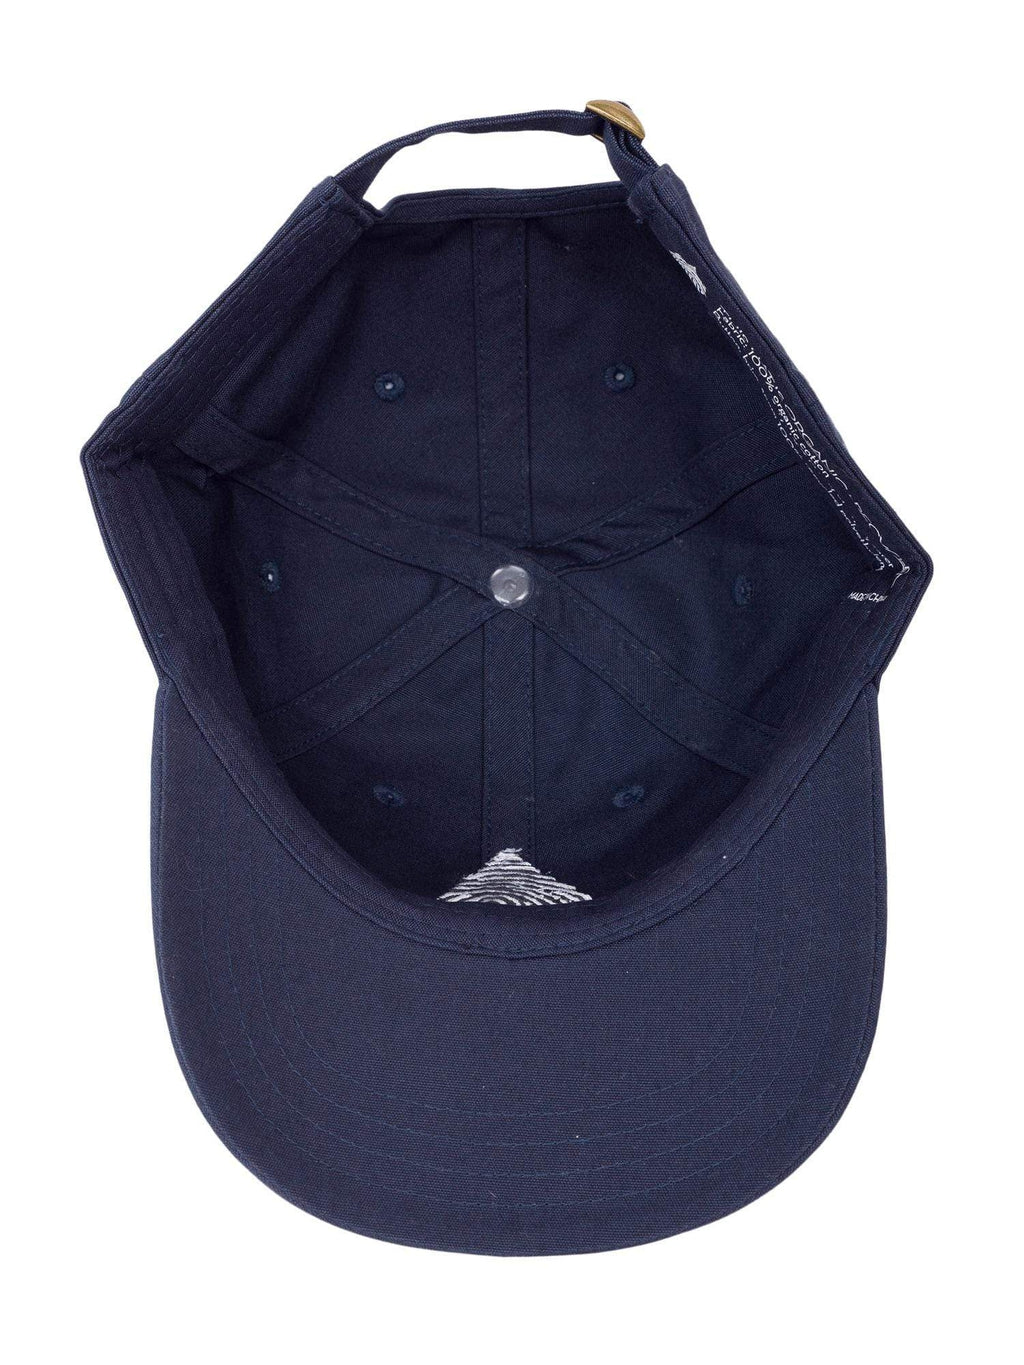 Interior view of a navy blue organic cotton dad cap hat